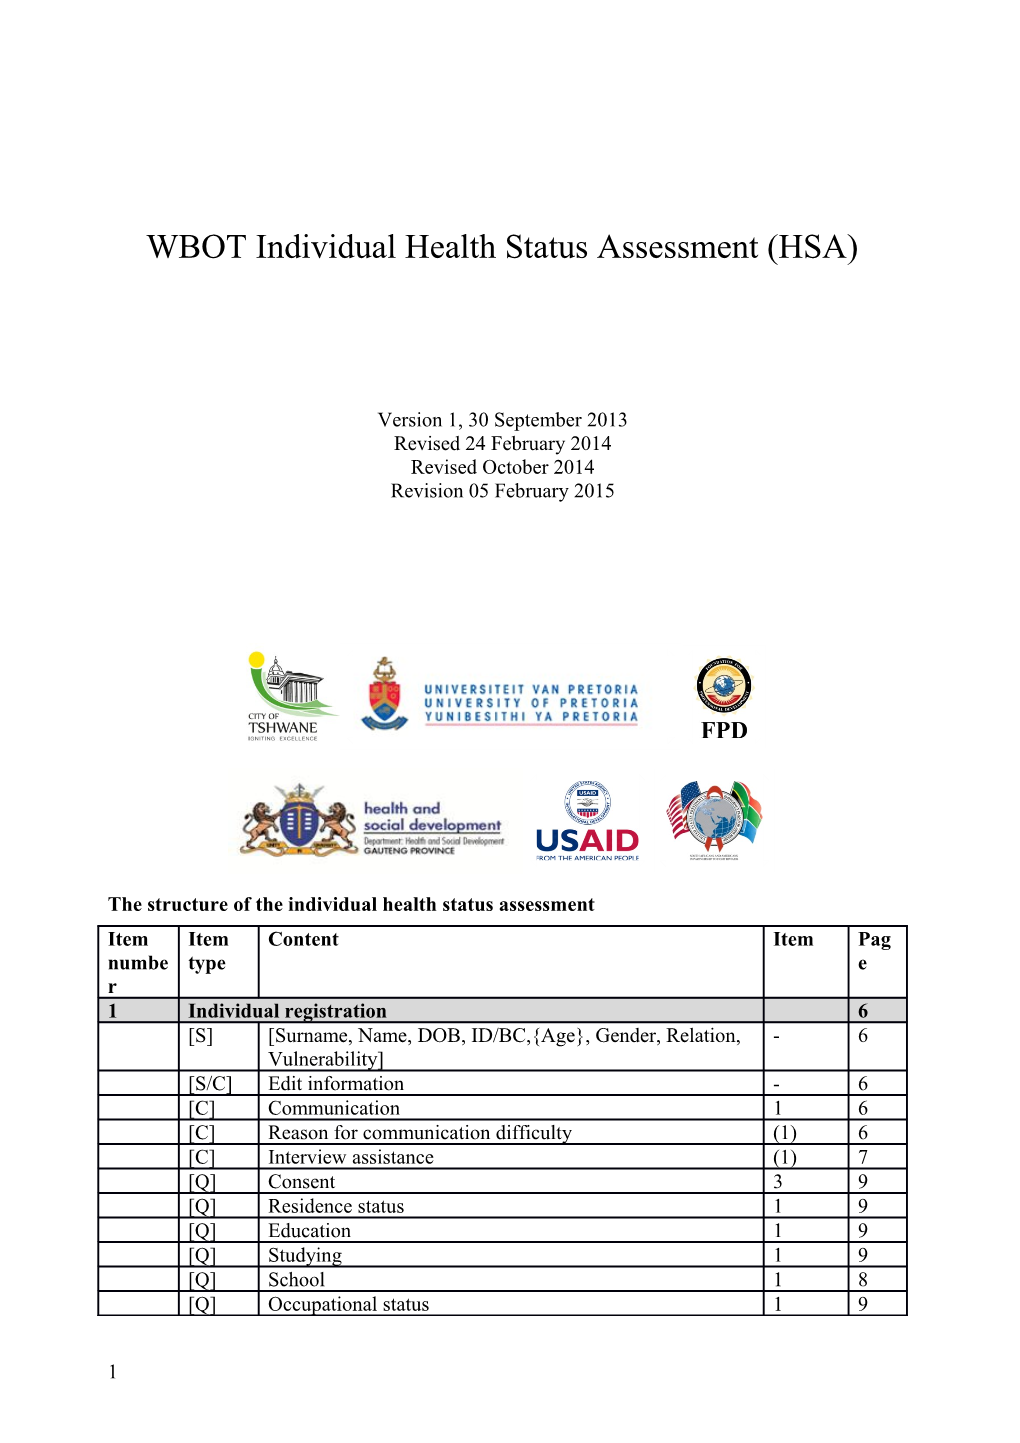 The Structure of the Individual Health Status Assessment